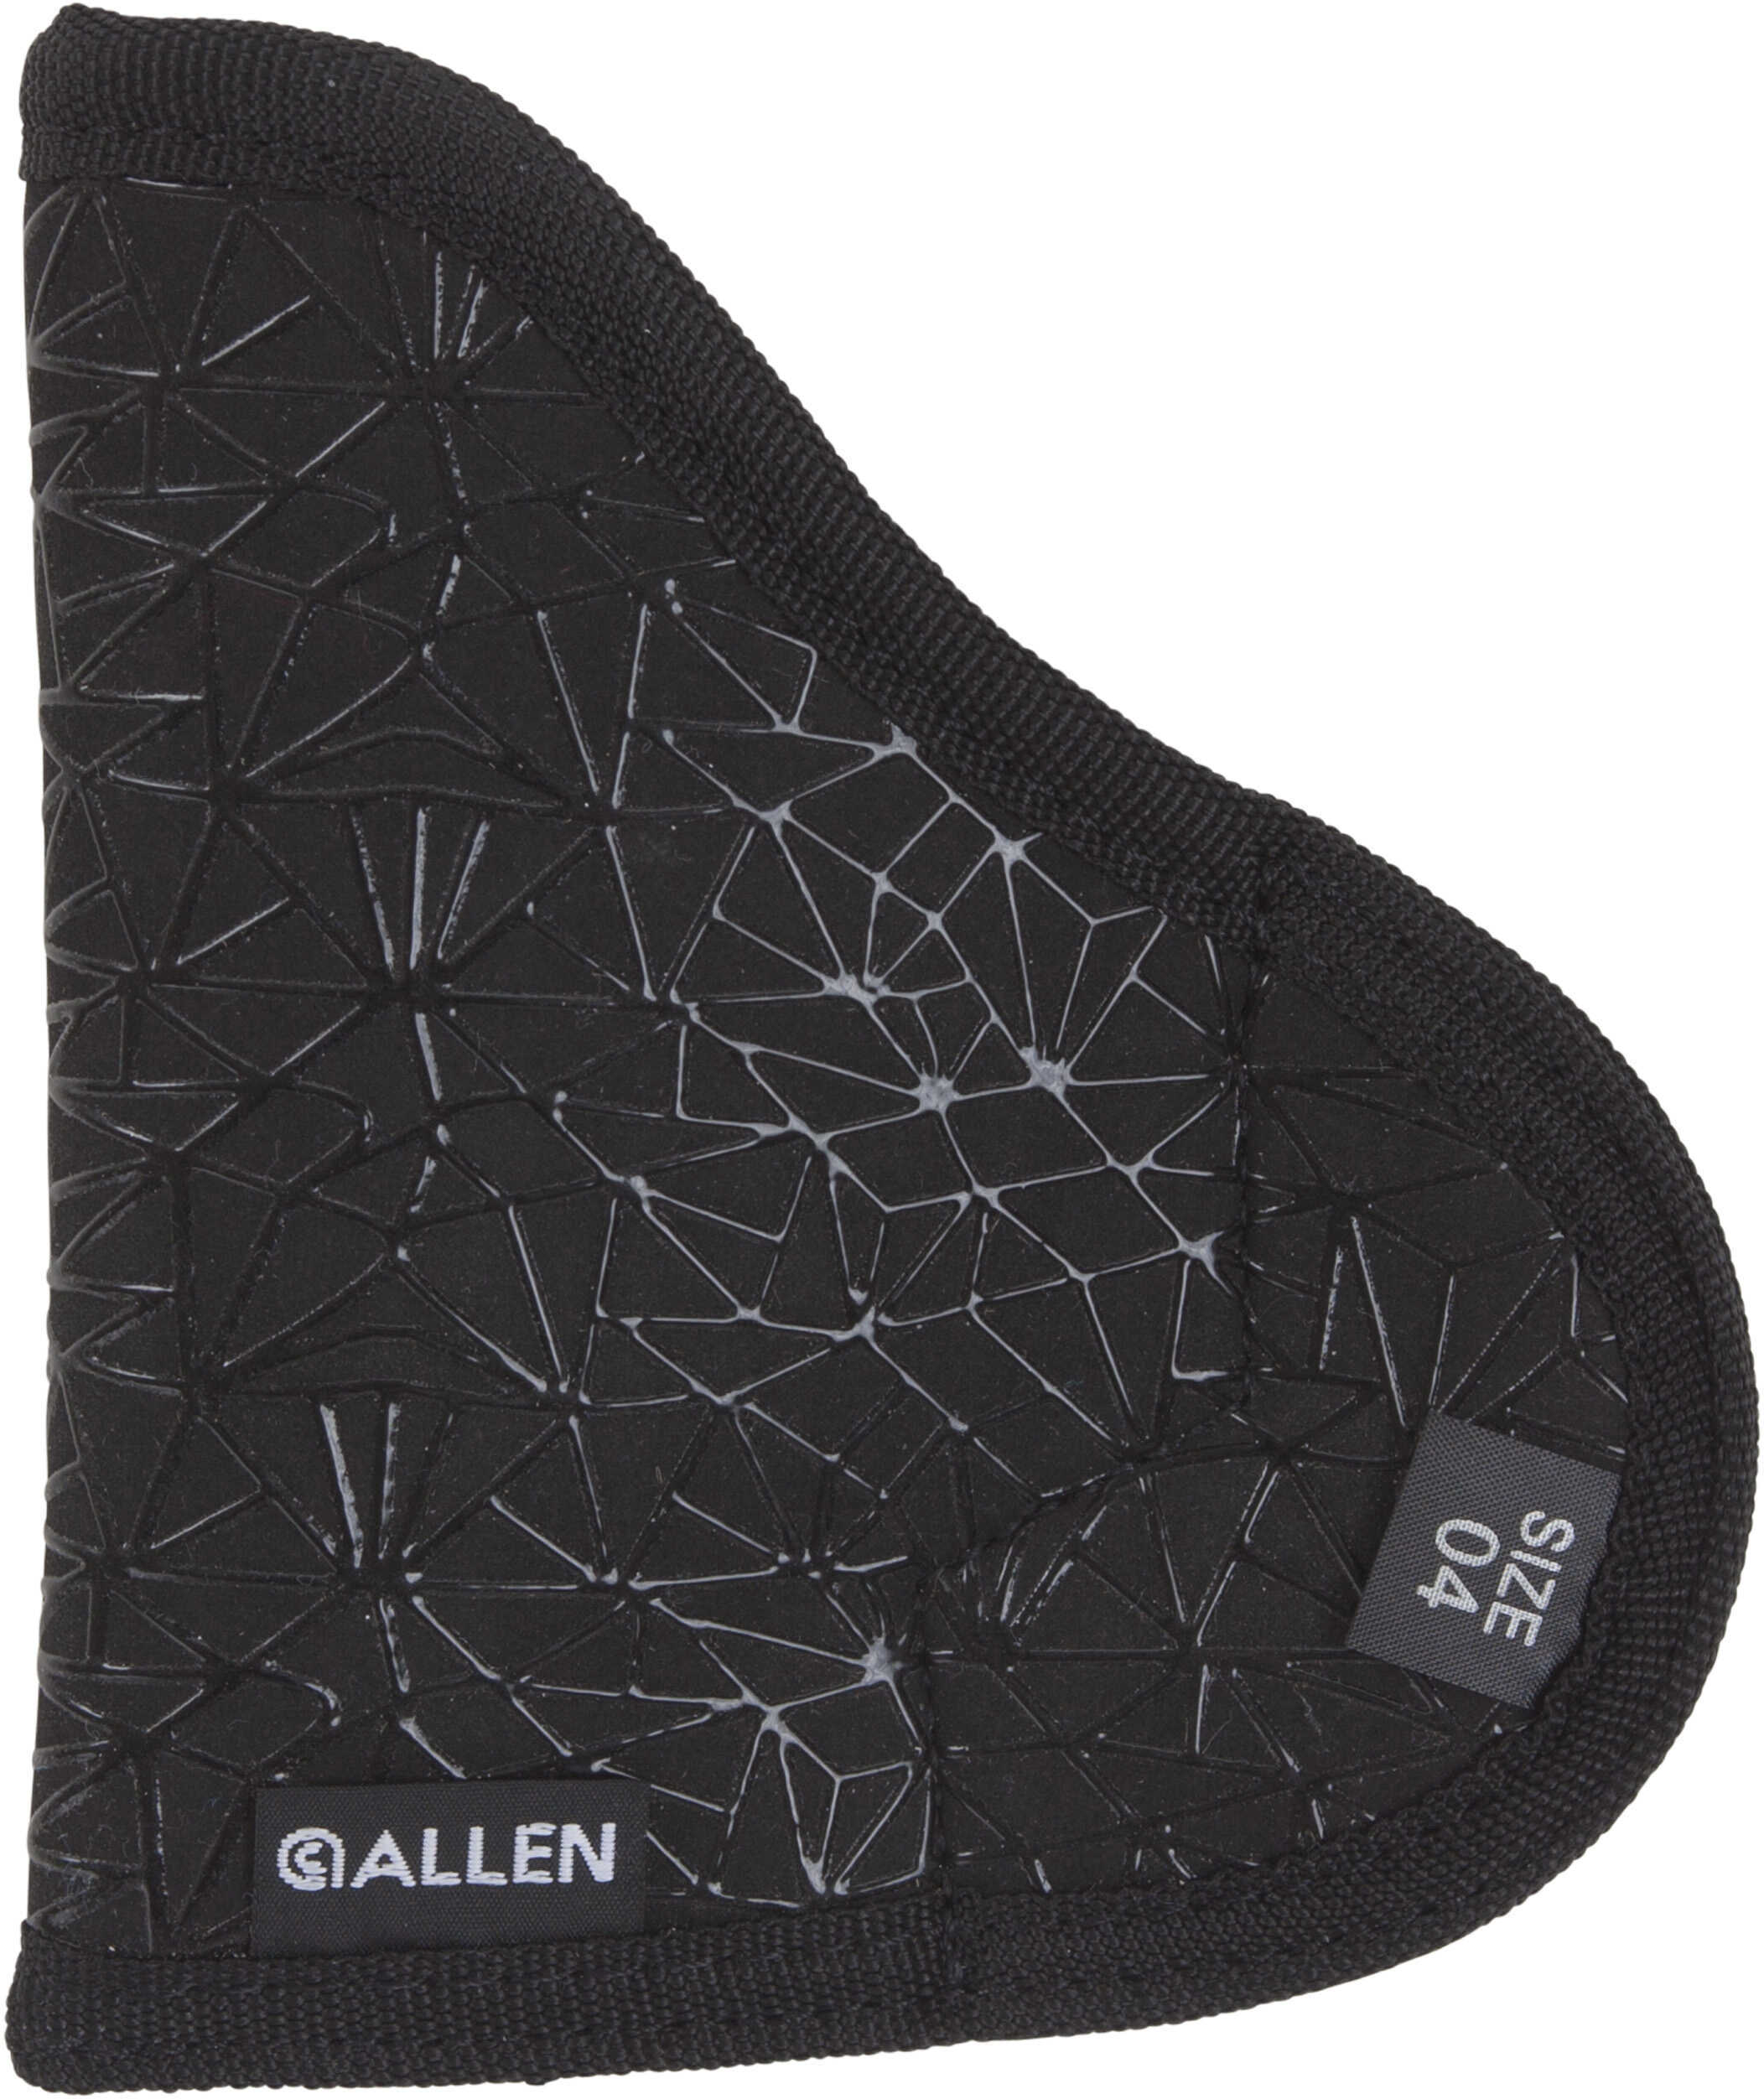 Allen Cases Company Spiderweb Holster For Ruger LCP & Small 380s Ambidextrous Black Size 04 Md: 44904